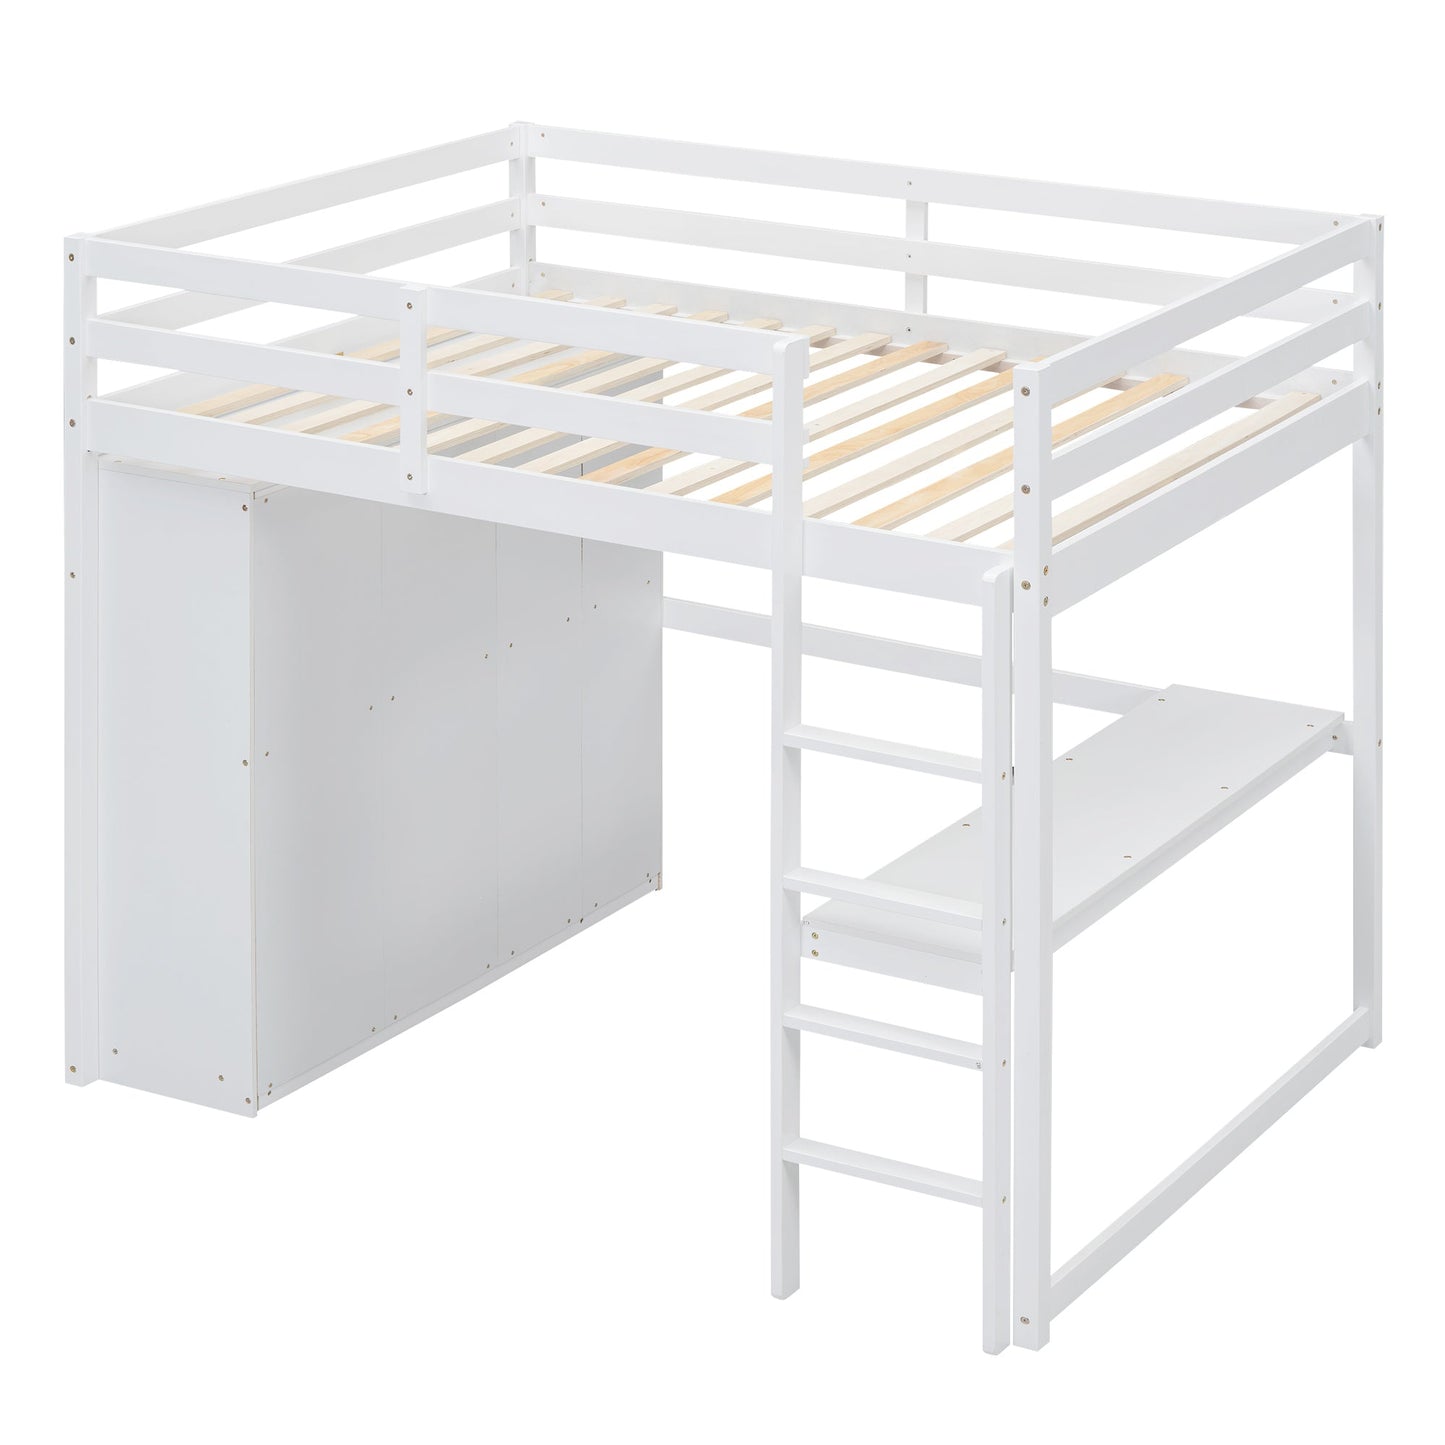 Wood Full Size Loft Bed with Built-in Wardrobe, Desk, Storage Shelves and Drawers, White